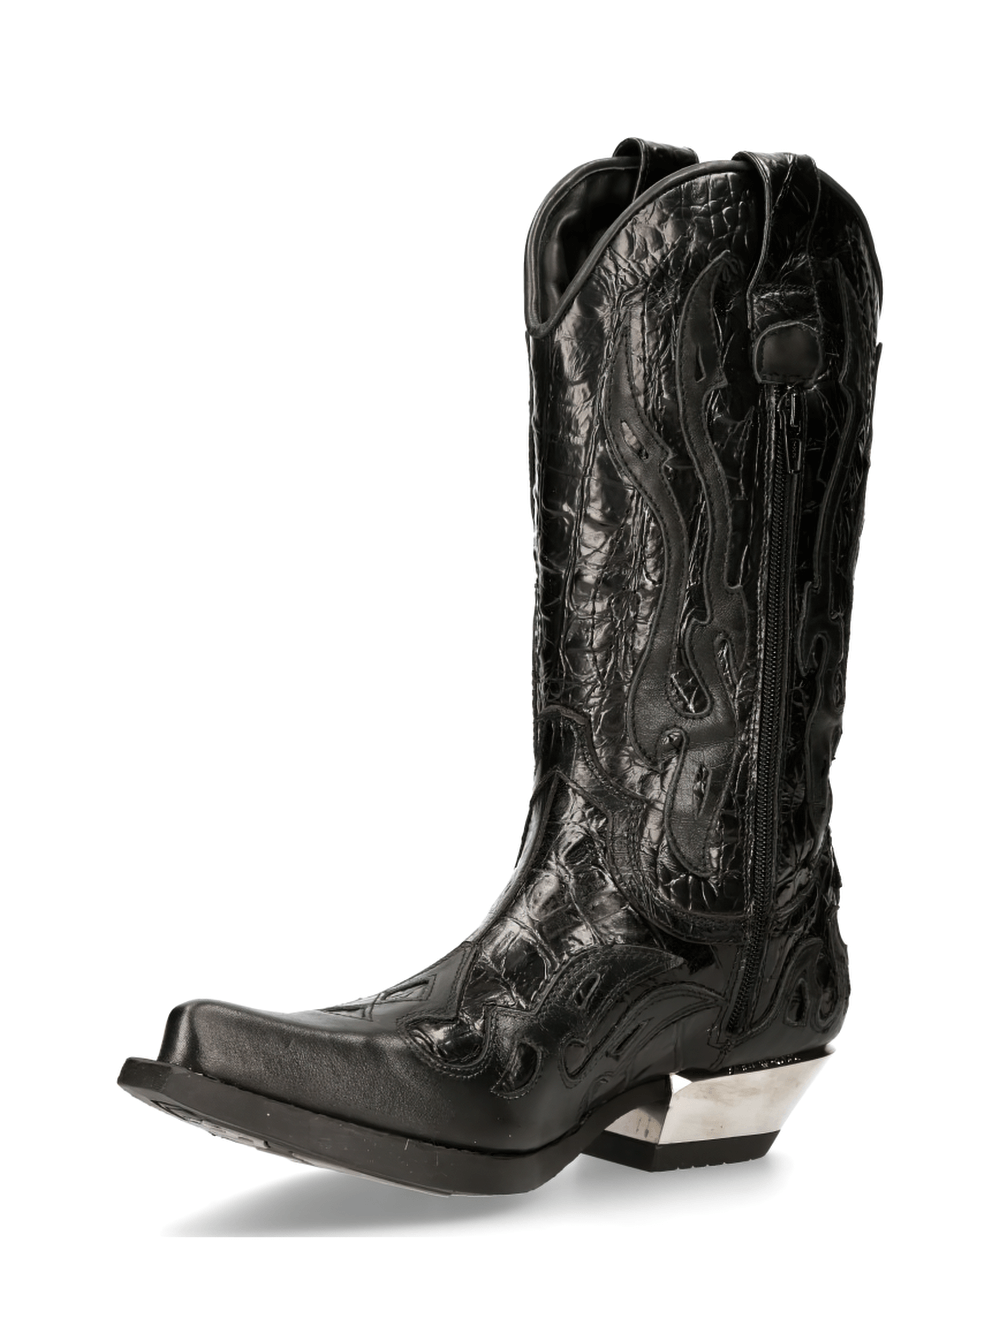 NEW ROCK Embossed Zippered Black Leather Cowboy Boots